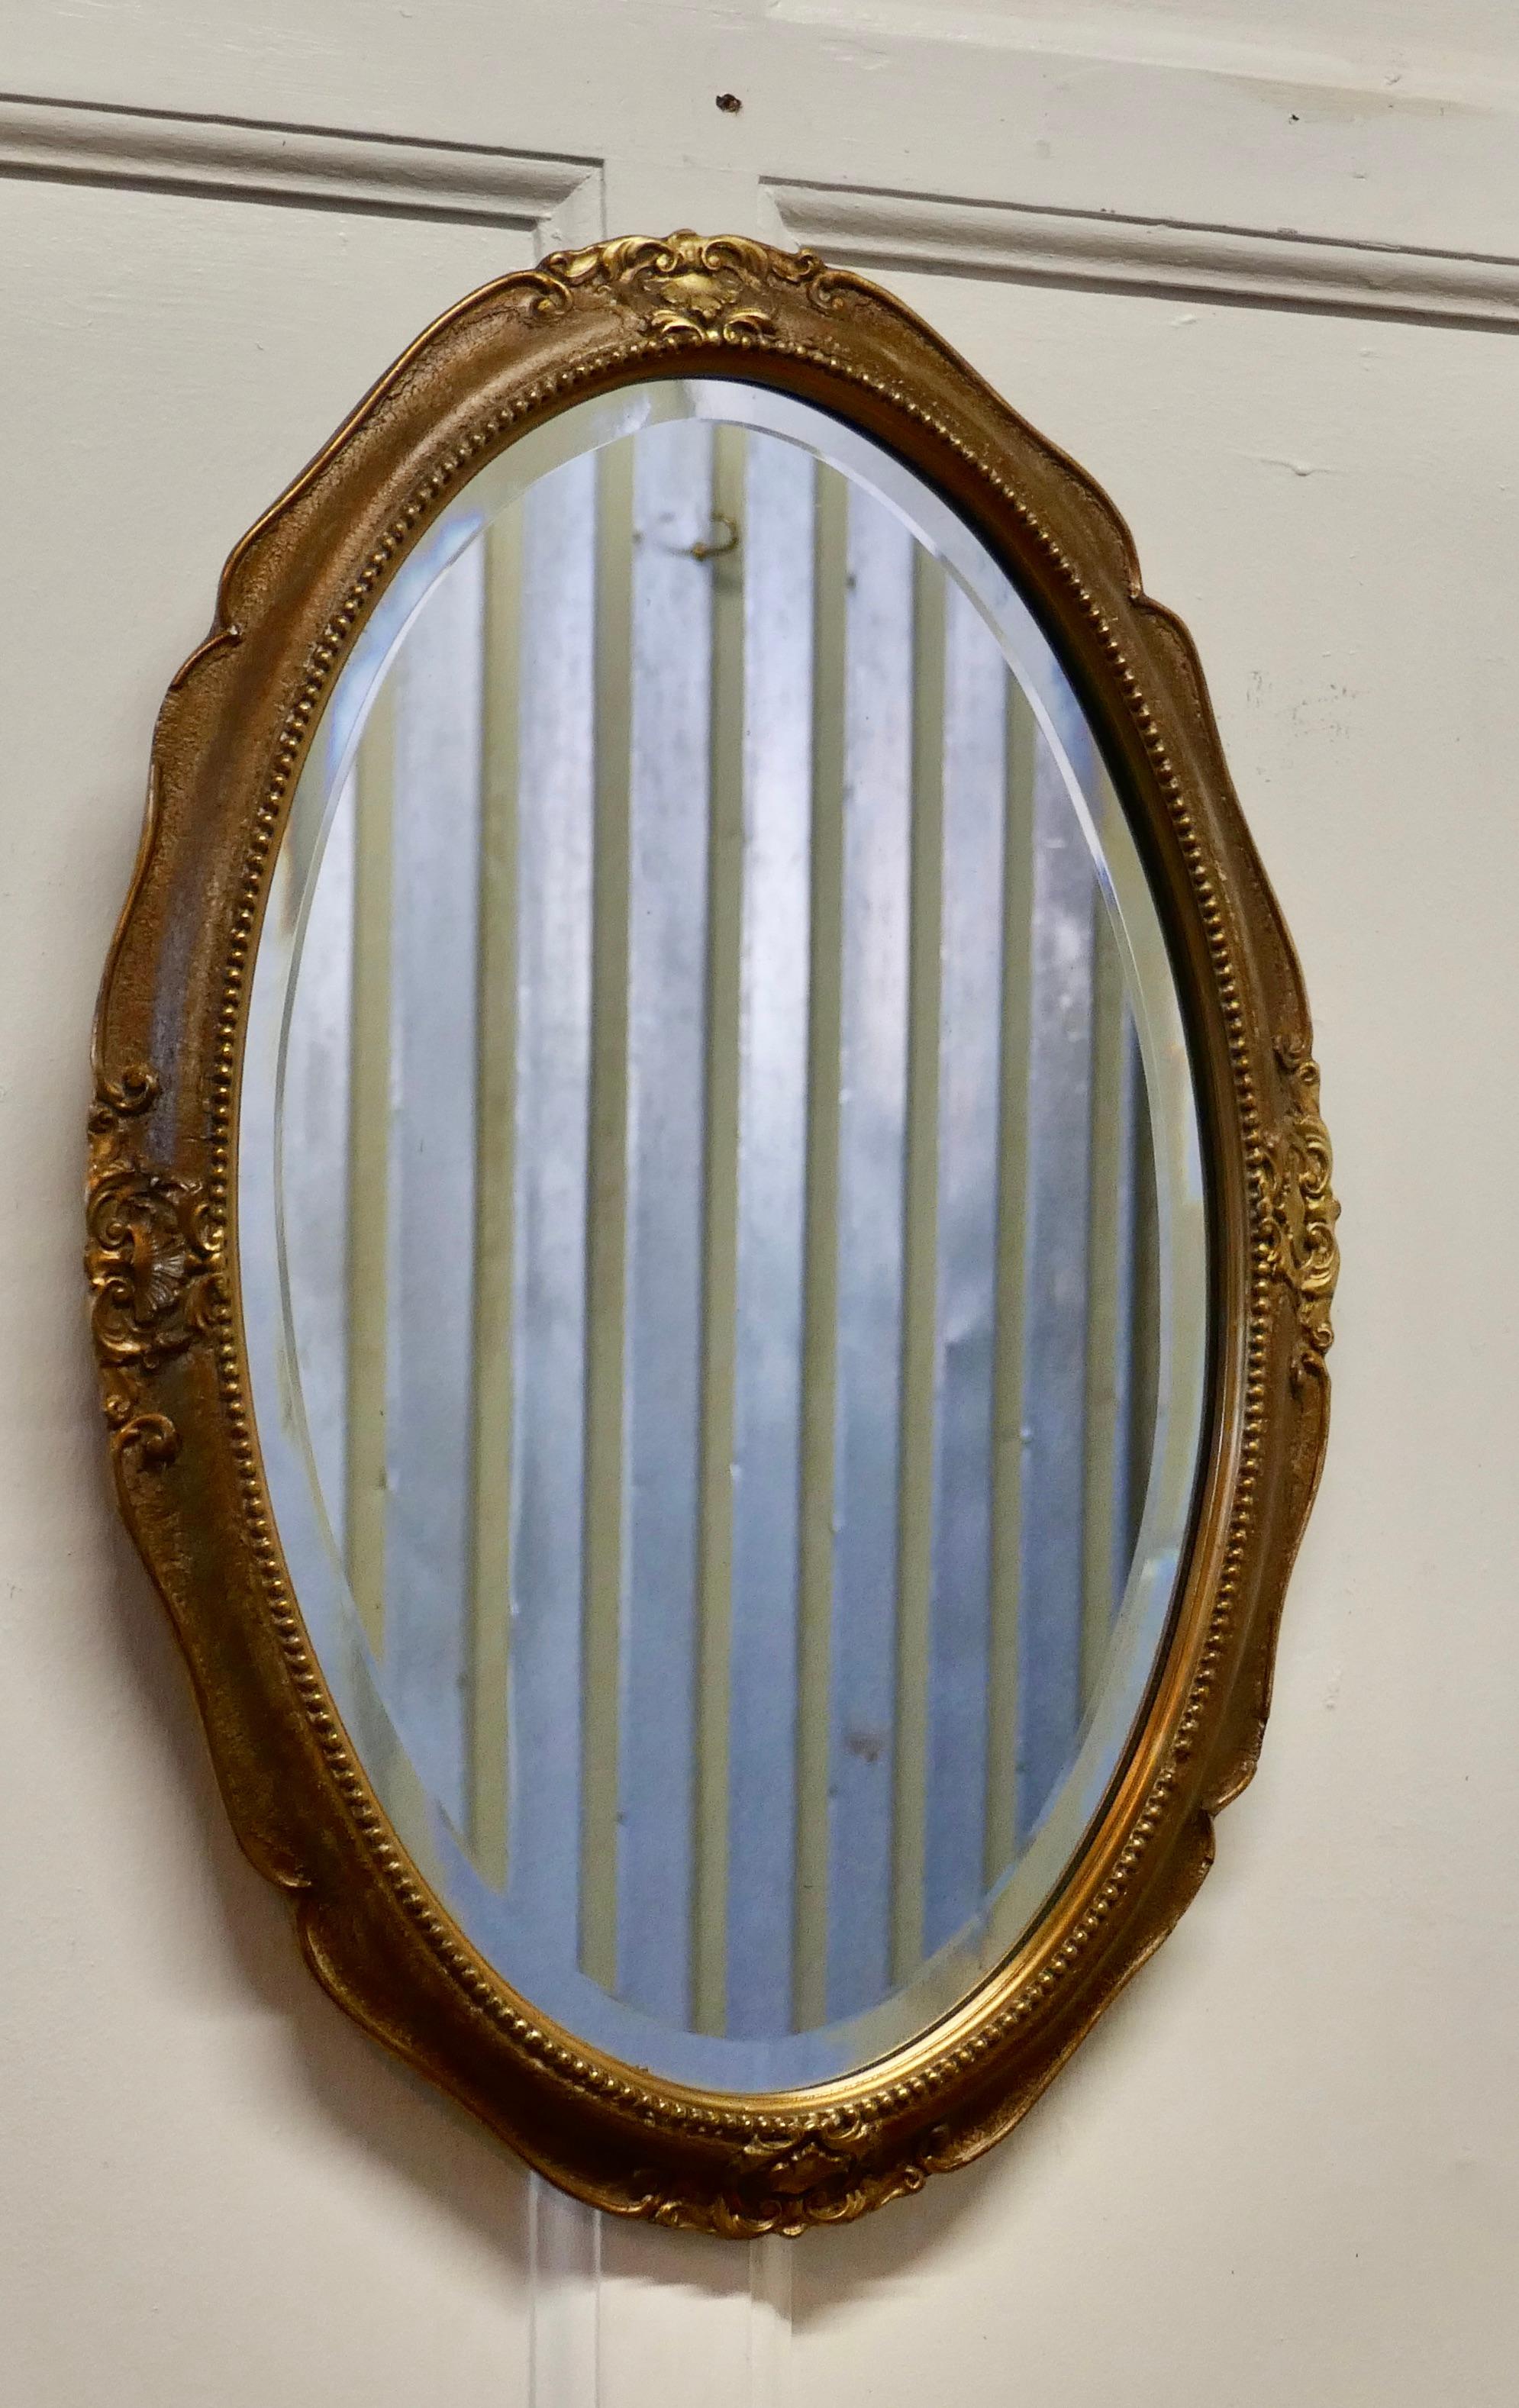 An Art Deco oval gilt wall mirror

The mirror has a very attractive 2” wide gilt Frame in a Rococo style decoration. 
This is a charming piece, with a bevelled glass, all in good condition 
The mirror is 16” wide and 24” tall,
AC144.